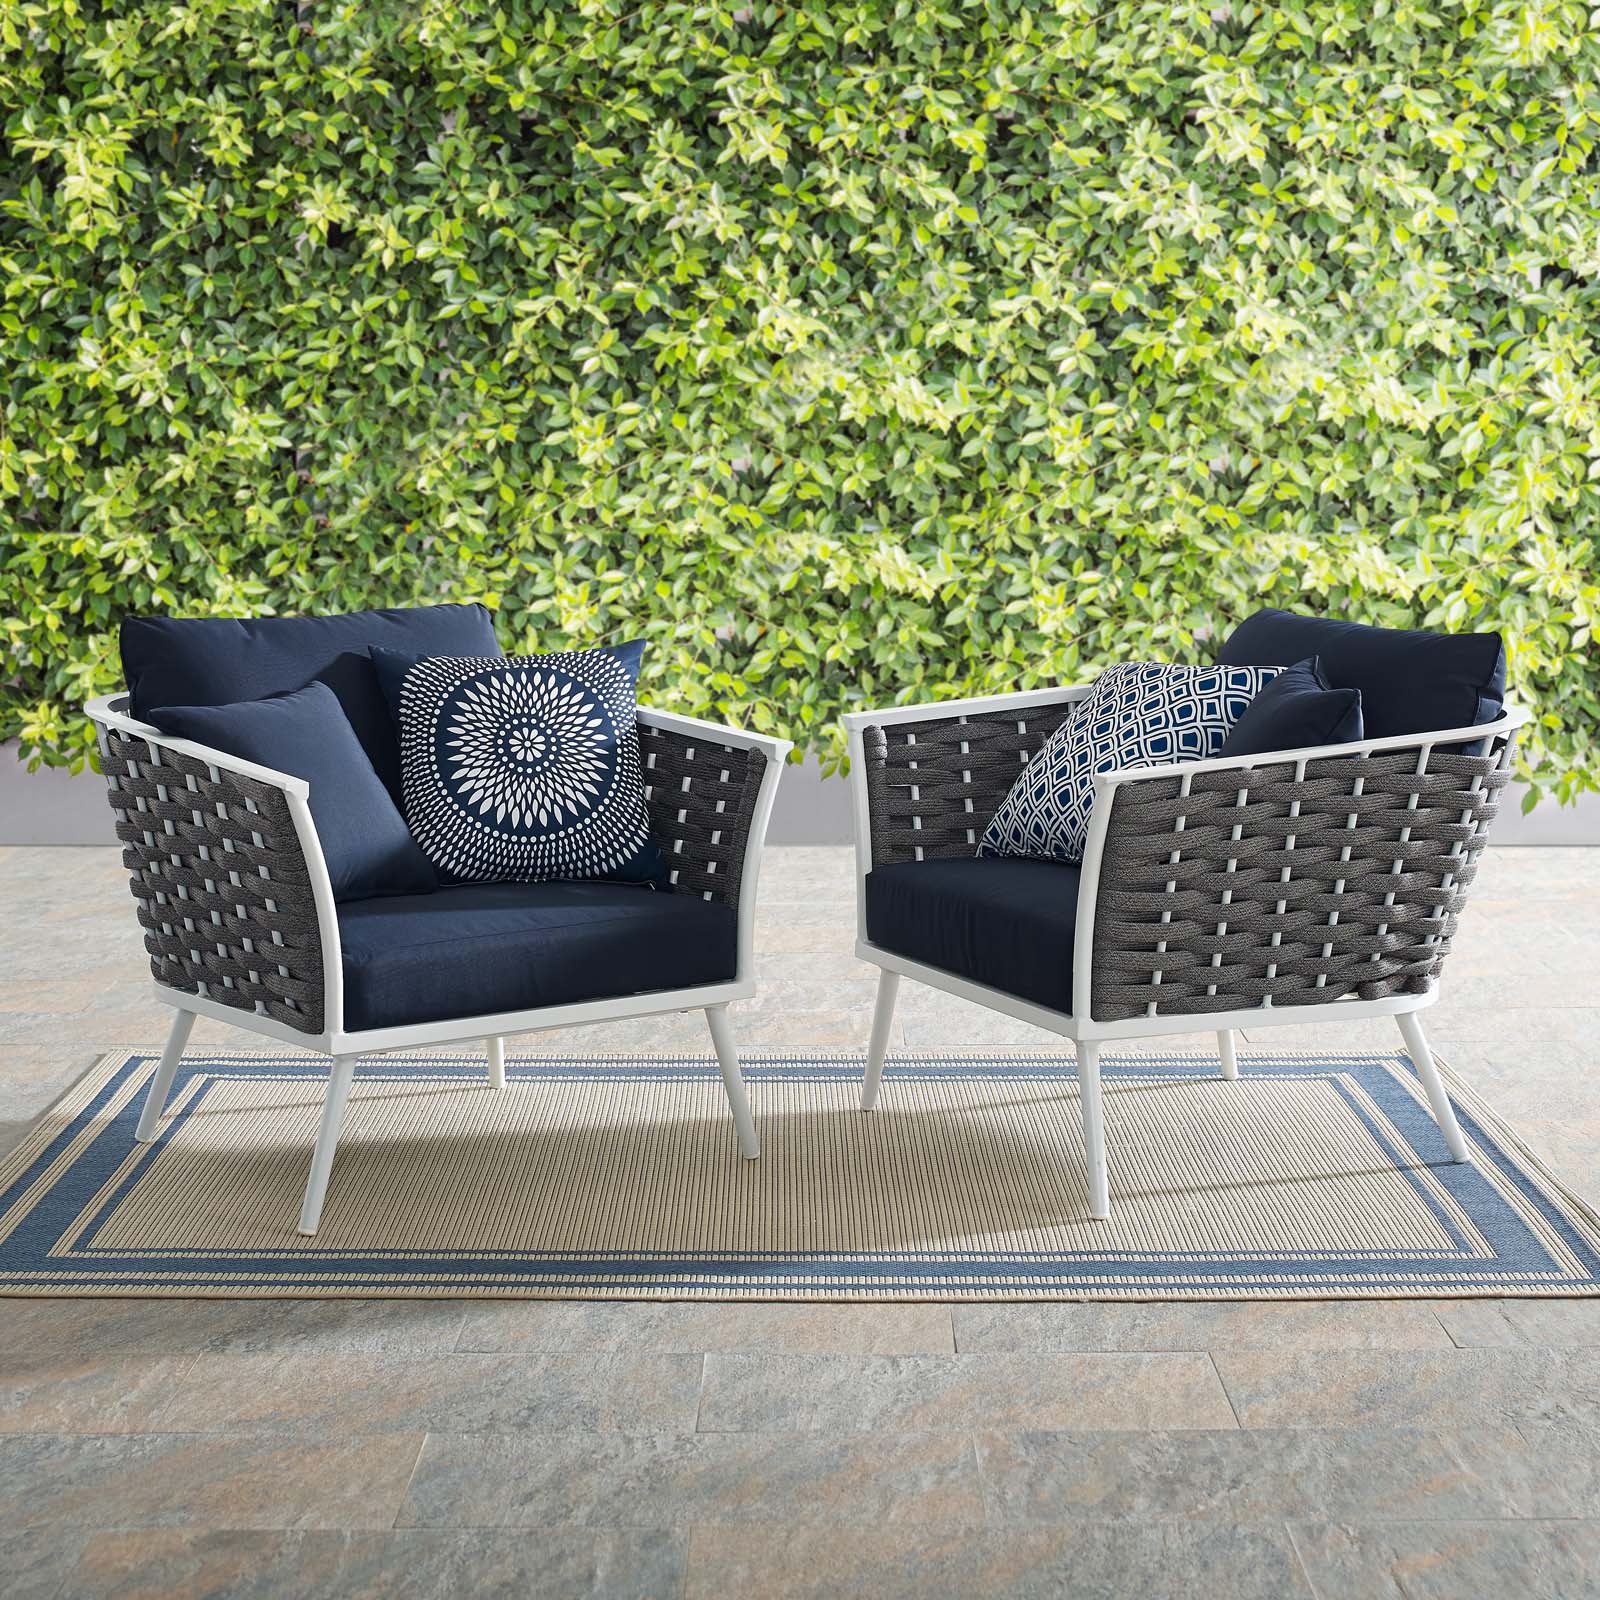 Stance Armchair Outdoor Patio Aluminum Set of 2-Outdoor Set-Modway-Wall2Wall Furnishings